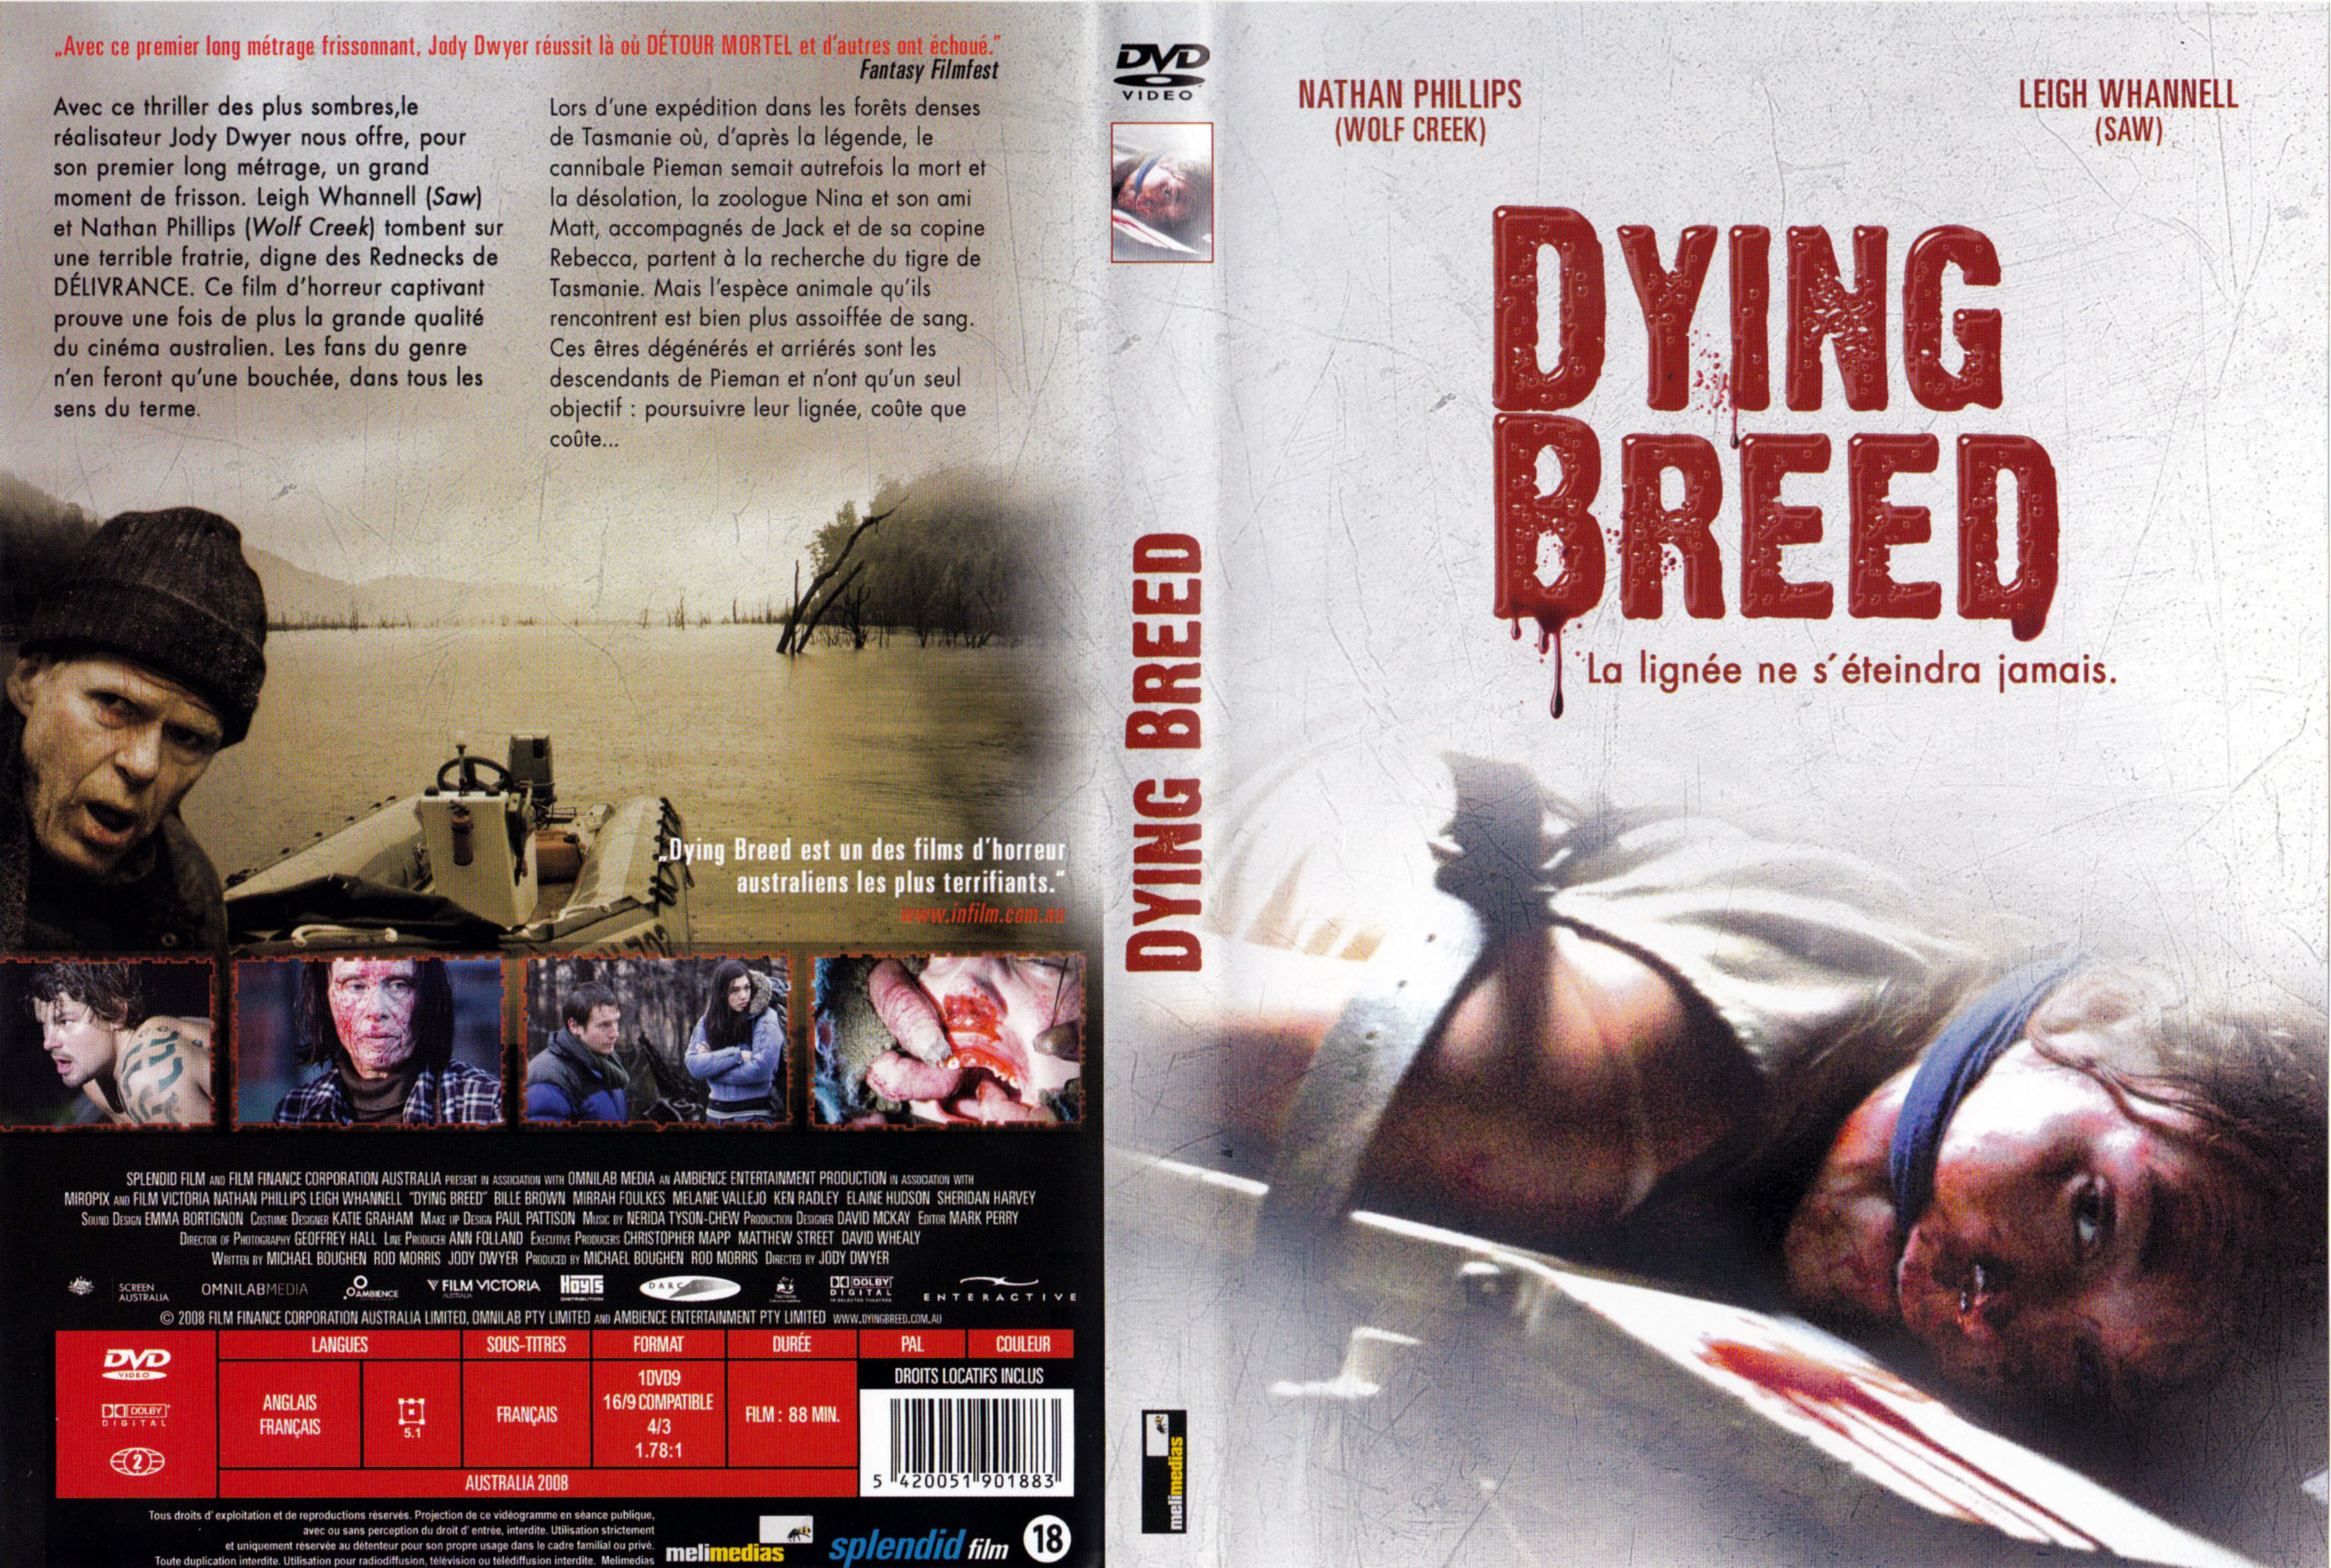 Jaquette DVD Dying Breed 